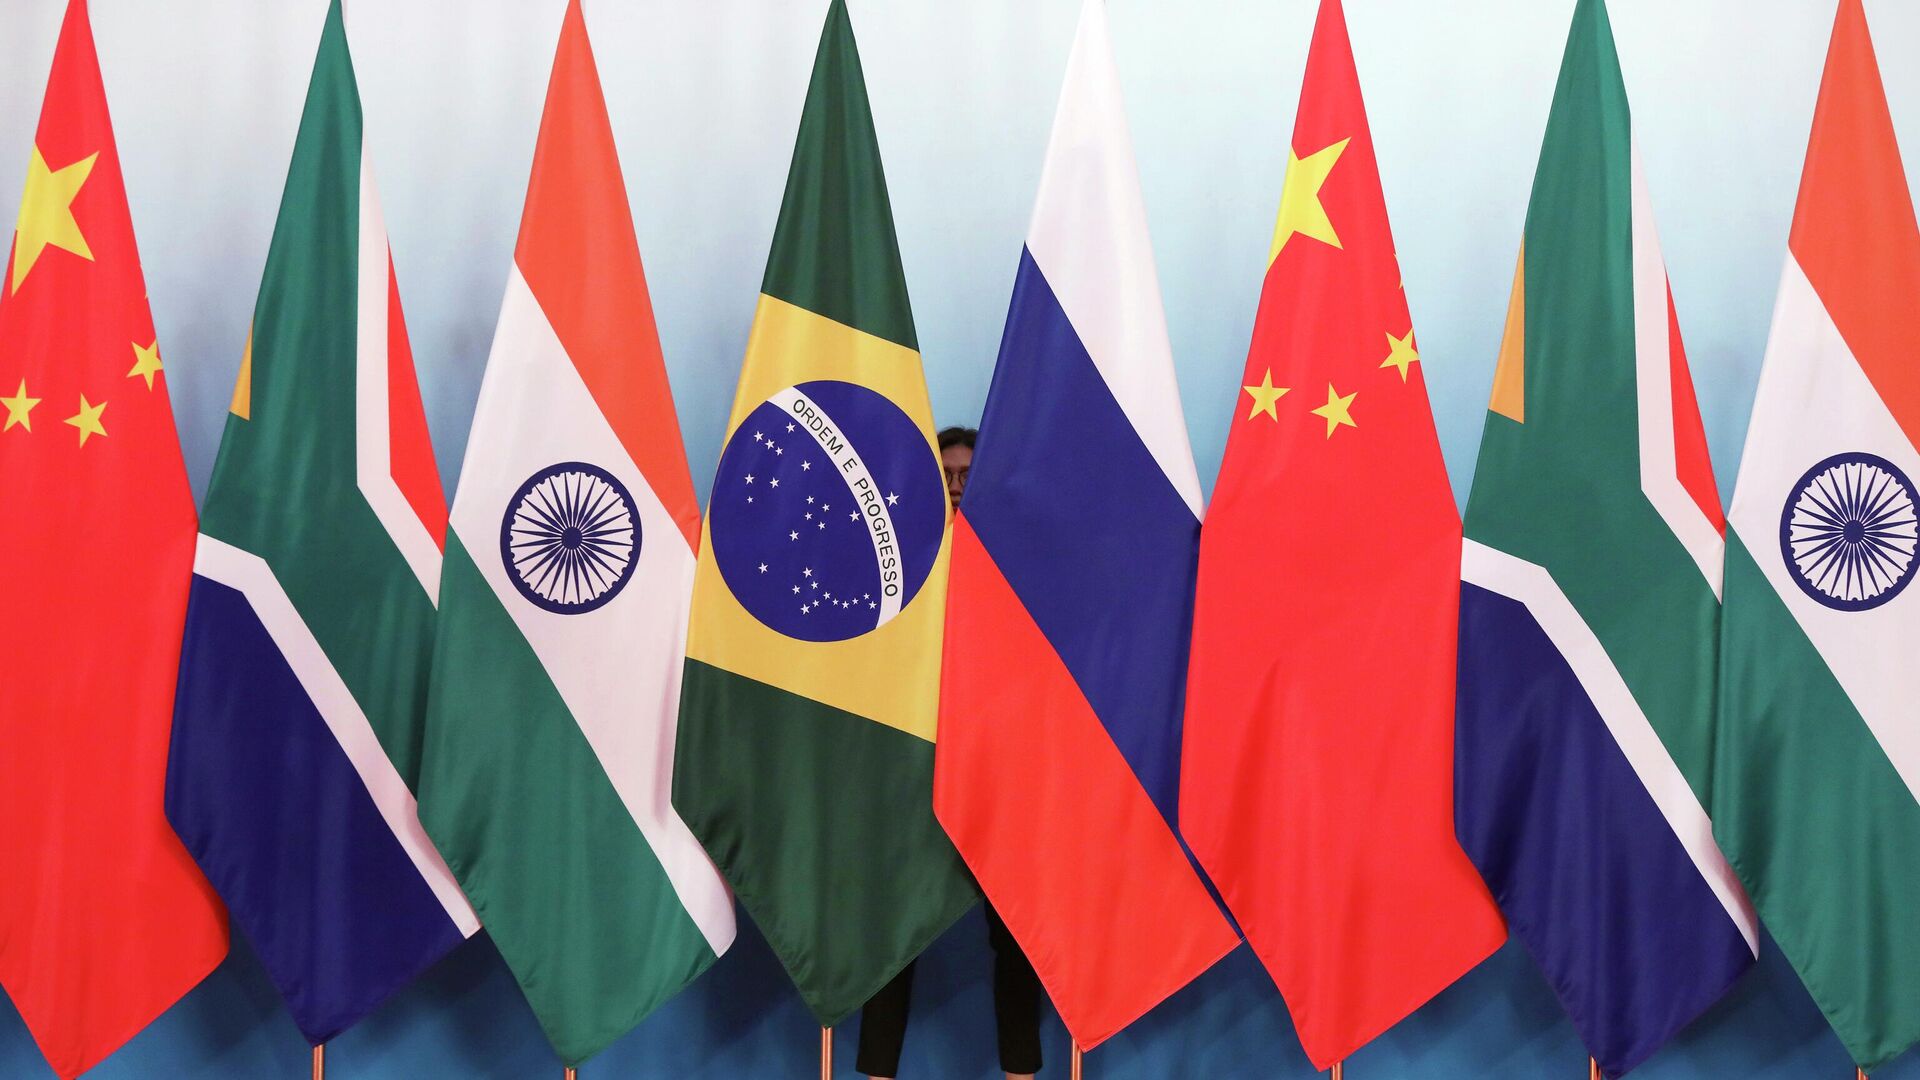 Staff worker stands behind national flags of Brazil, Russia, China, South Africa and India to tidy the flags ahead of a group photo during the BRICS Summit at the Xiamen International Conference and Exhibition Center in Xiamen, southeastern China's Fujian Province, Monday, Sept. 4, 2017. - Sputnik International, 1920, 22.01.2023